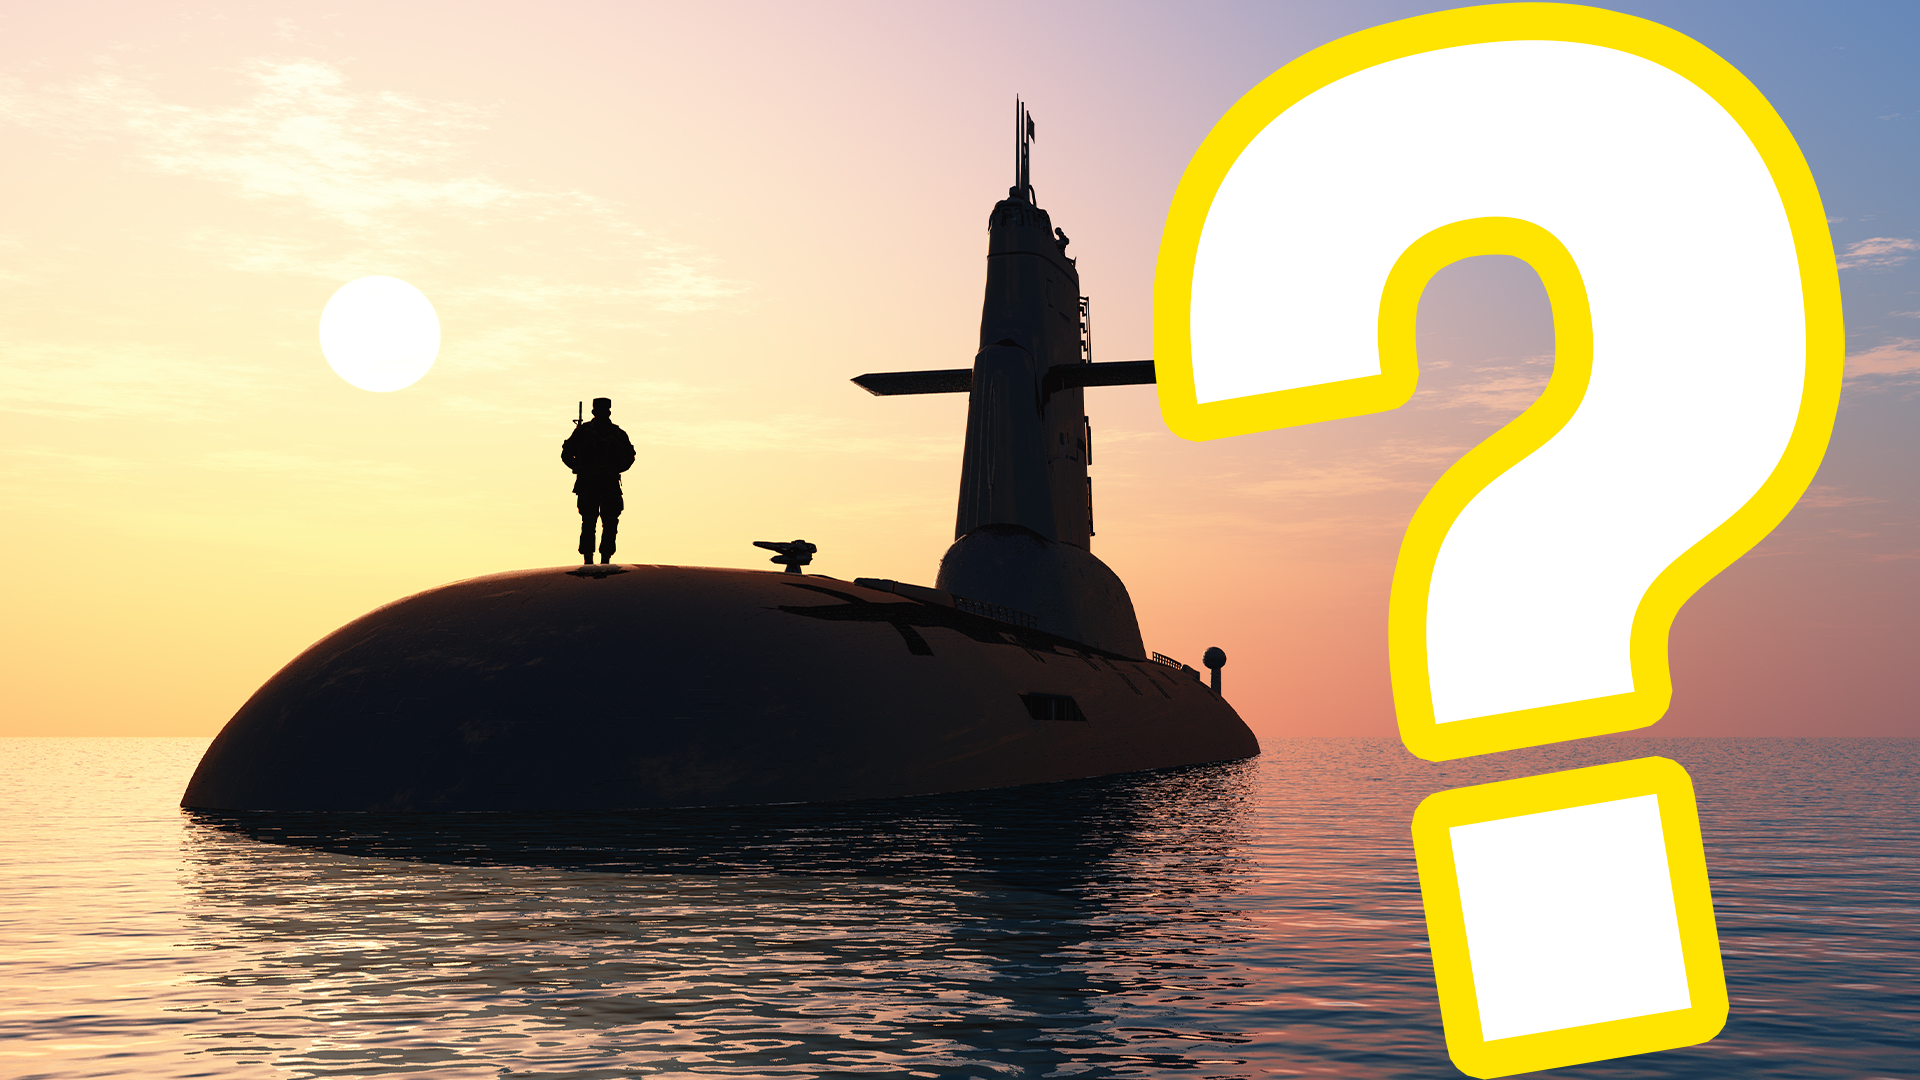 Submarine in the sunset with question mark